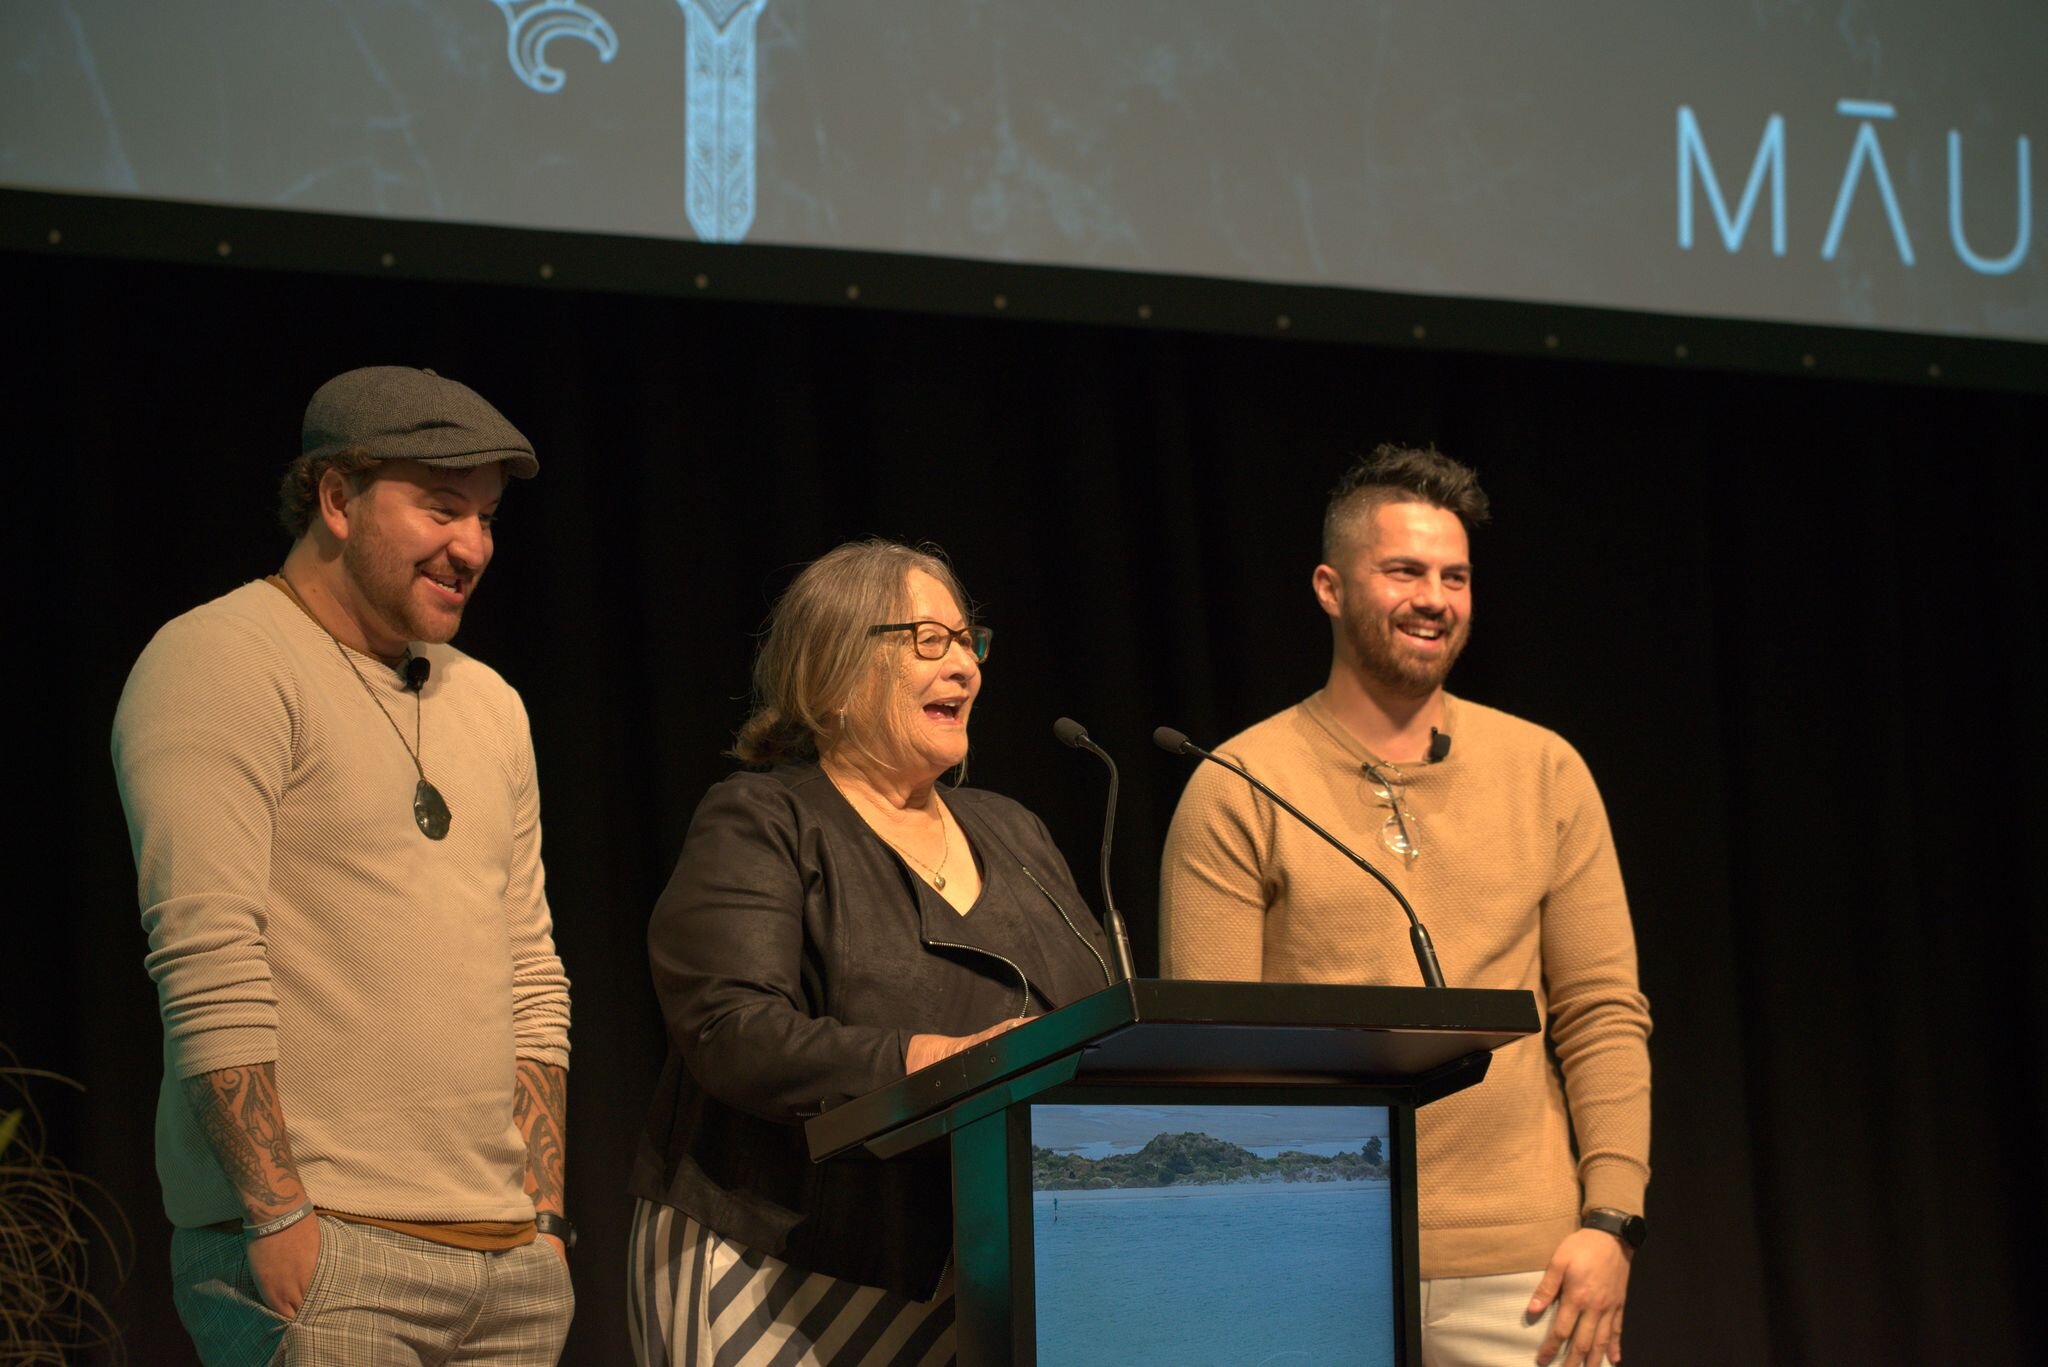 Our beautiful Whaea Molly, so very proud of her haututu boys, Madison Henry and Vincent Egan; who provided the final keynote (Maui Studios)